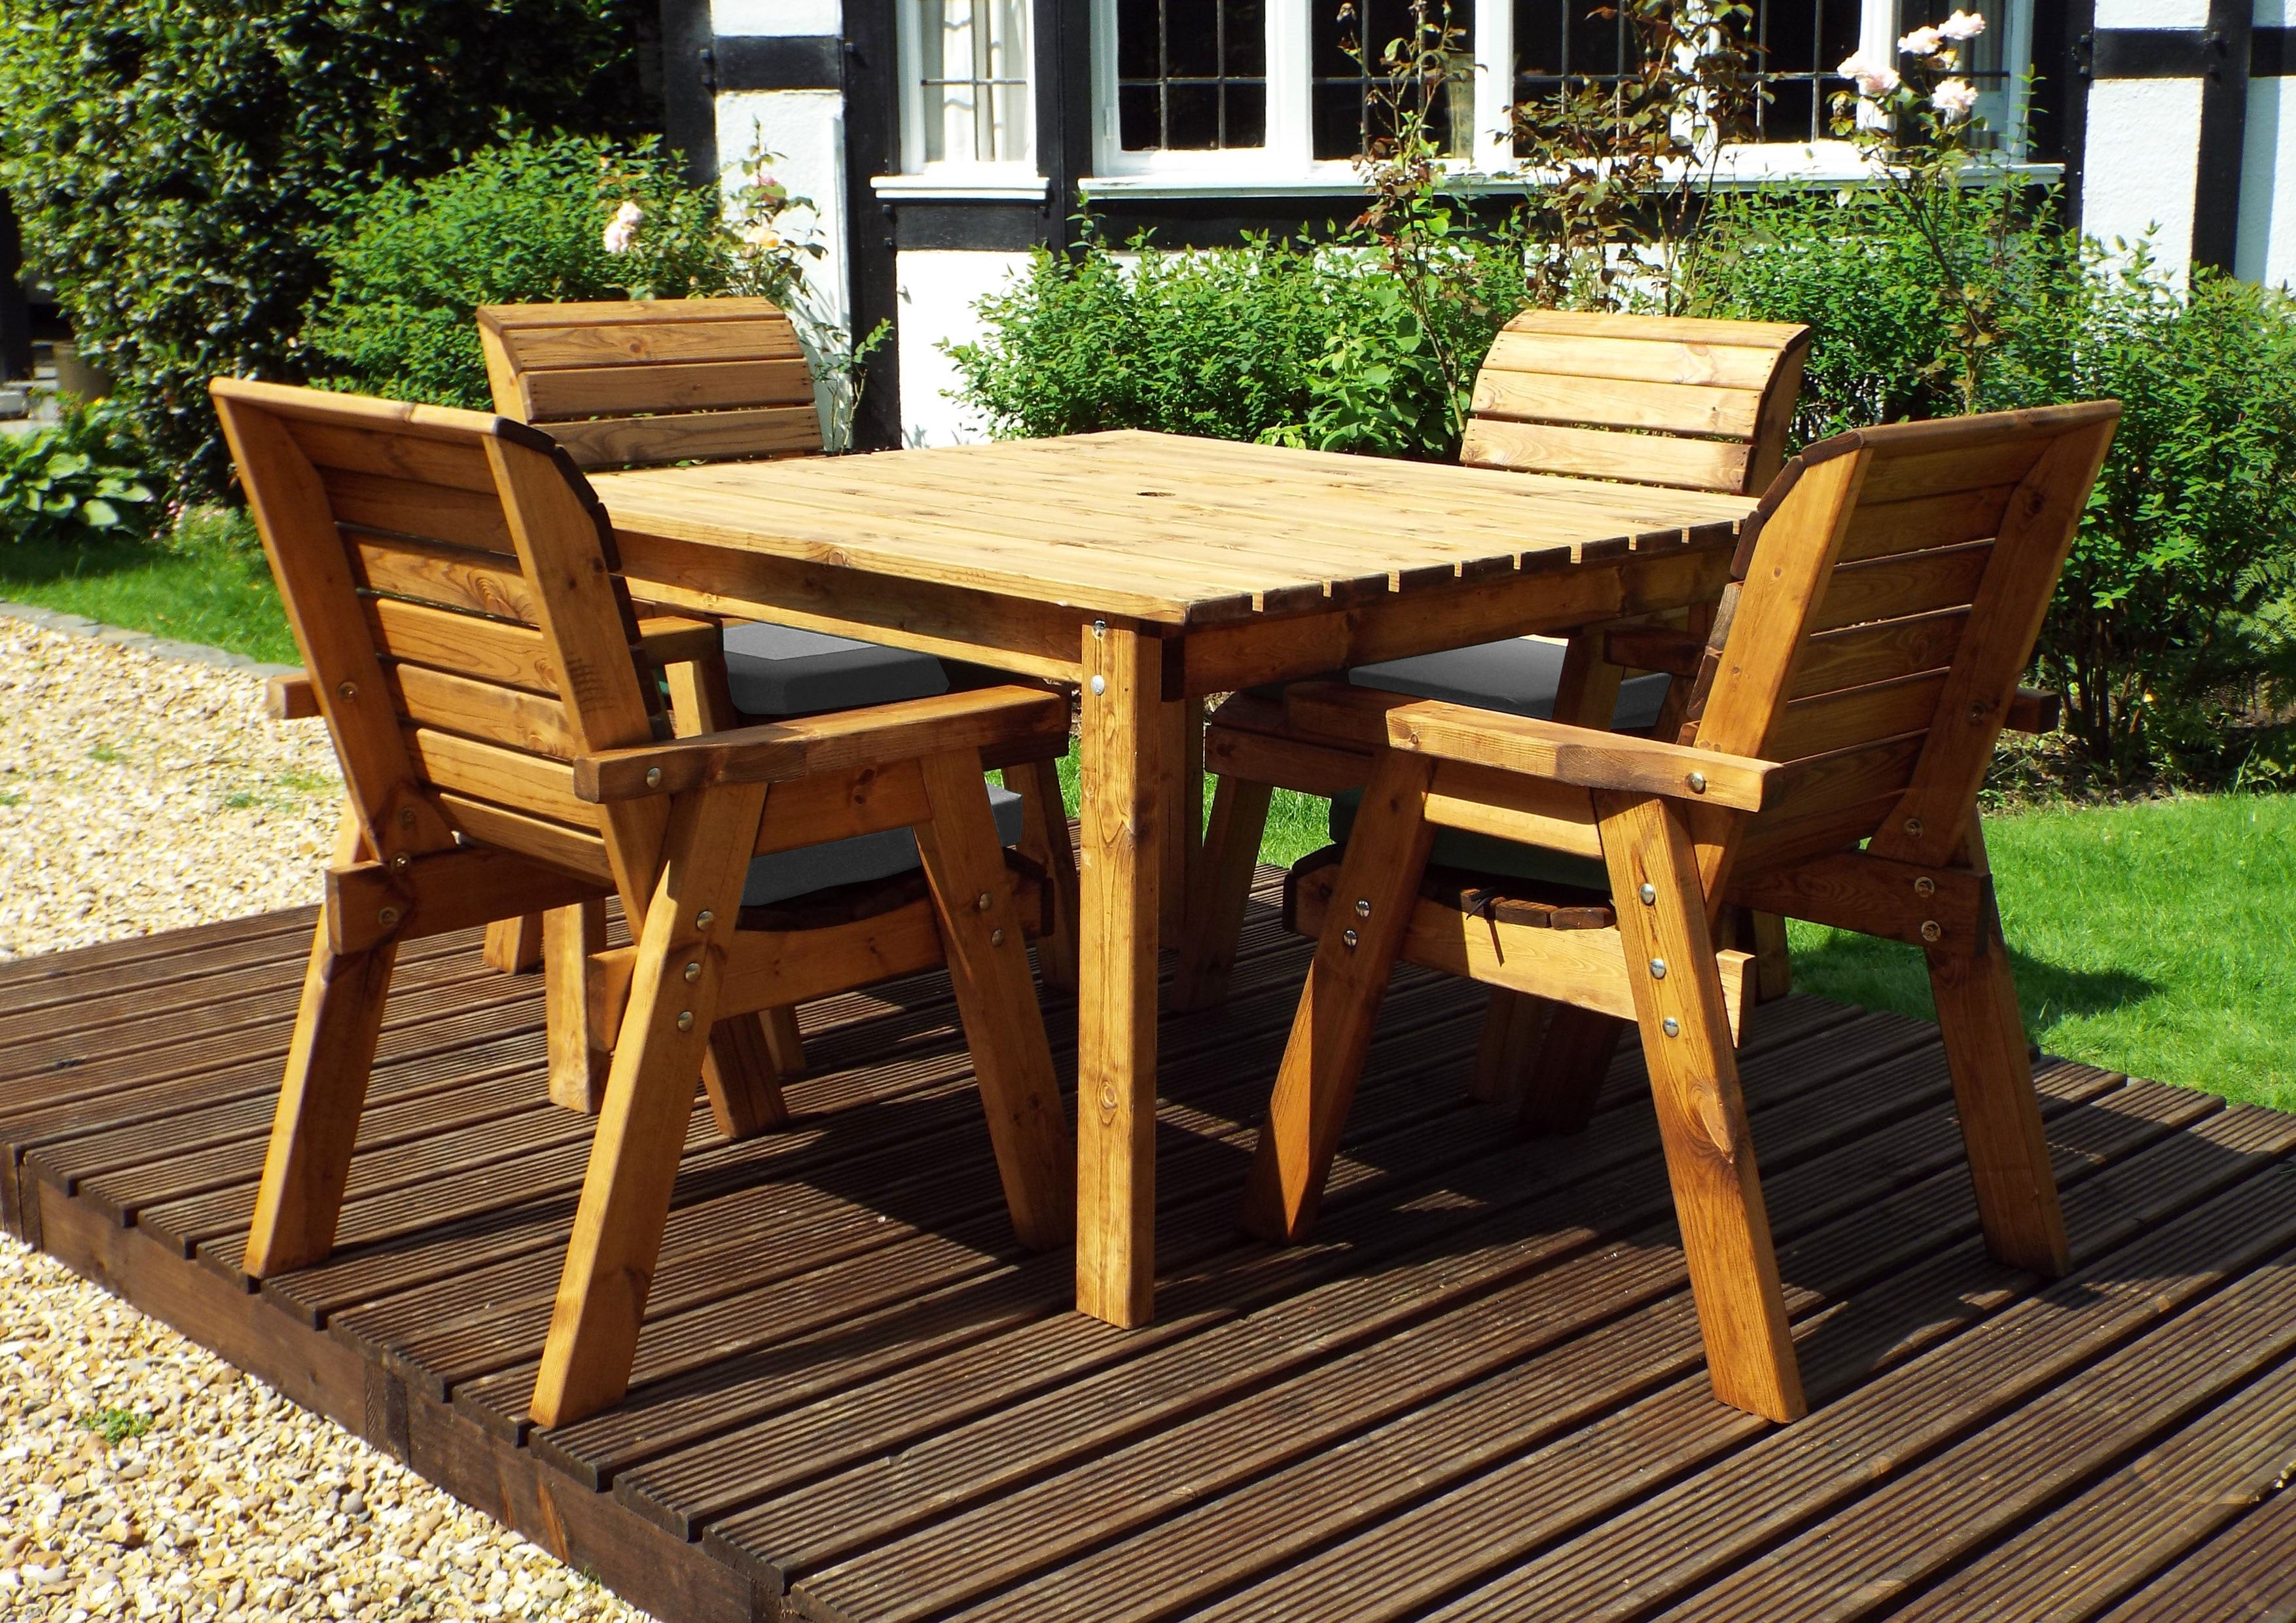 Combo Deal 3 - Four Seater Square Table Set Deal